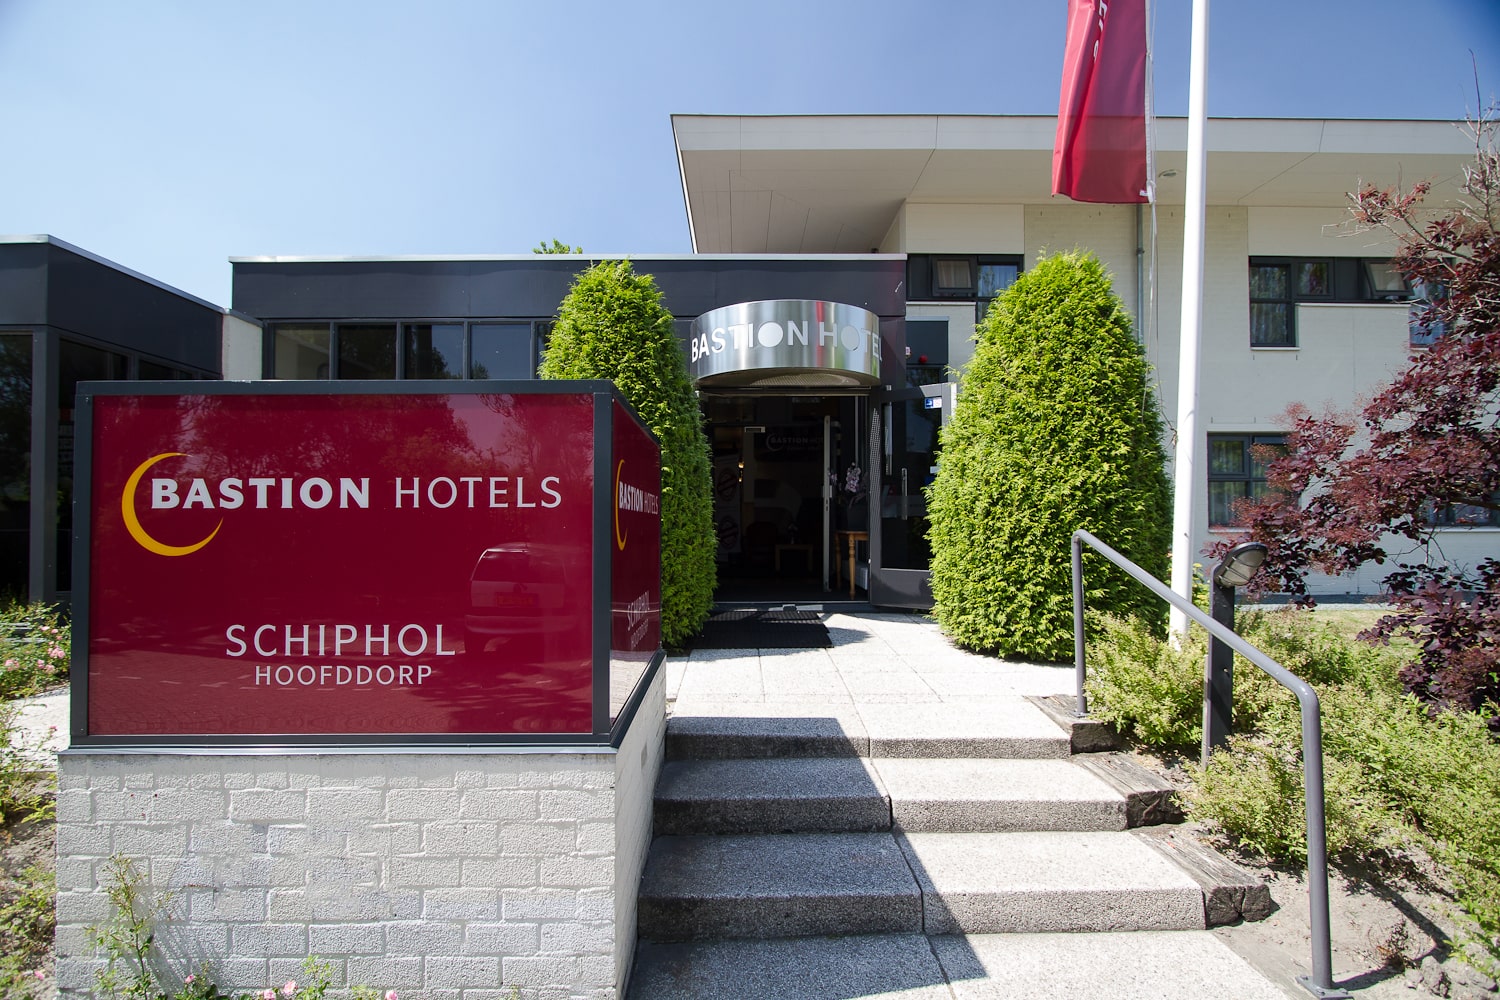 Bastion Hotel Schiphol Hoofddorp <br/>64.00 ew <br/> <a href='http://vakantieoplossing.nl/outpage/?id=d9ab7f6bd78c36f71c52d55faa269405' target='_blank'>View Details</a>